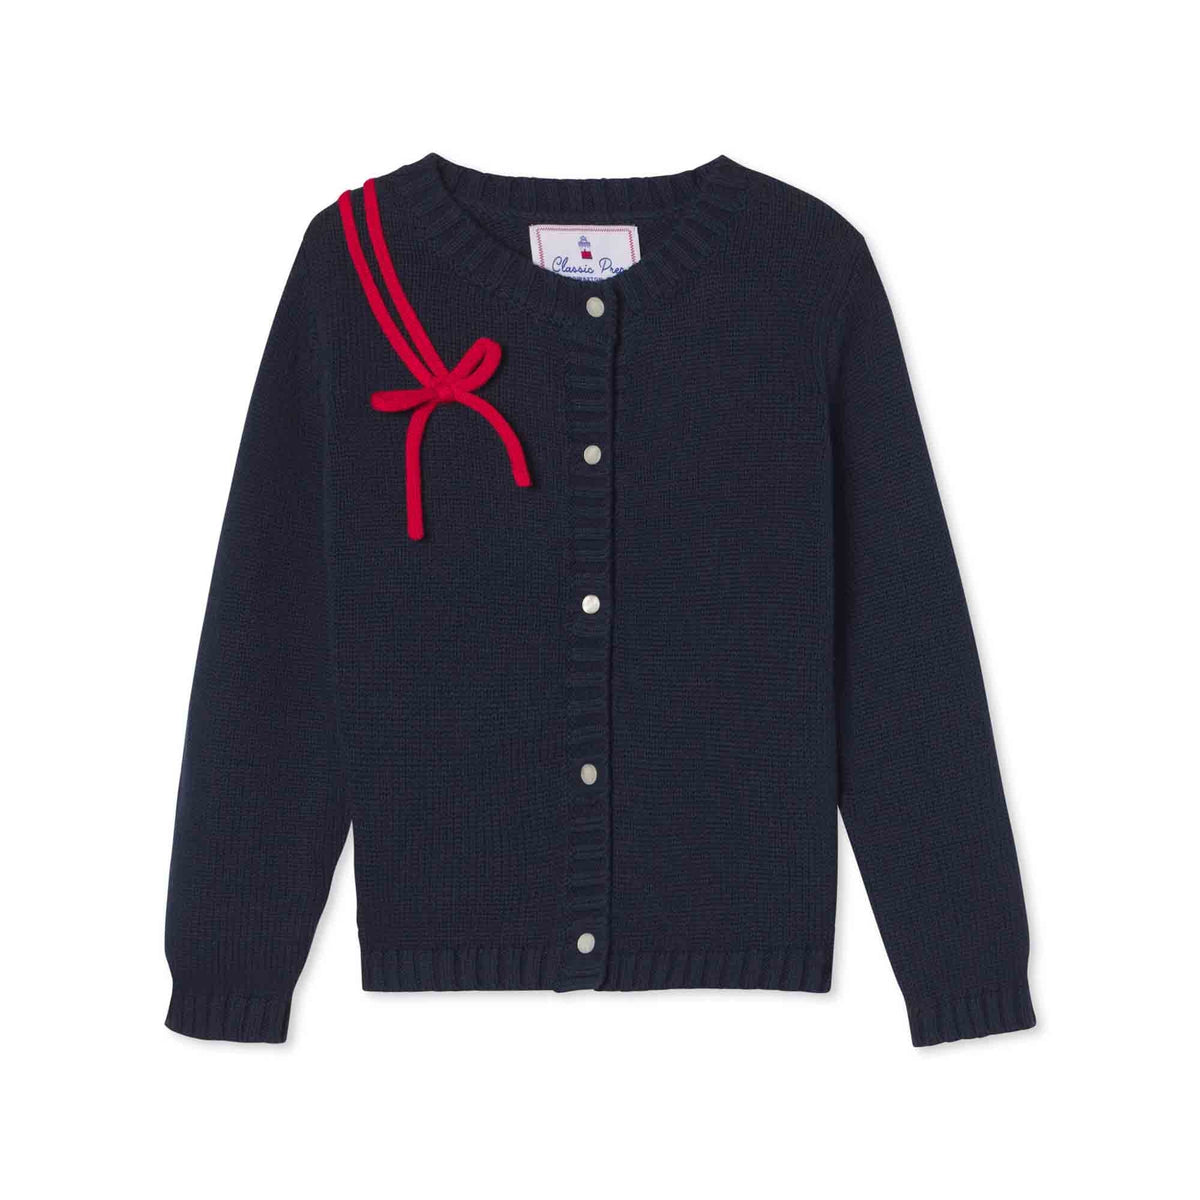 Classic and Preppy Elise Ice Skates Cardigan, Blue Ribbon-Sweaters-Blue Ribbon-2T-CPC - Classic Prep Childrenswear